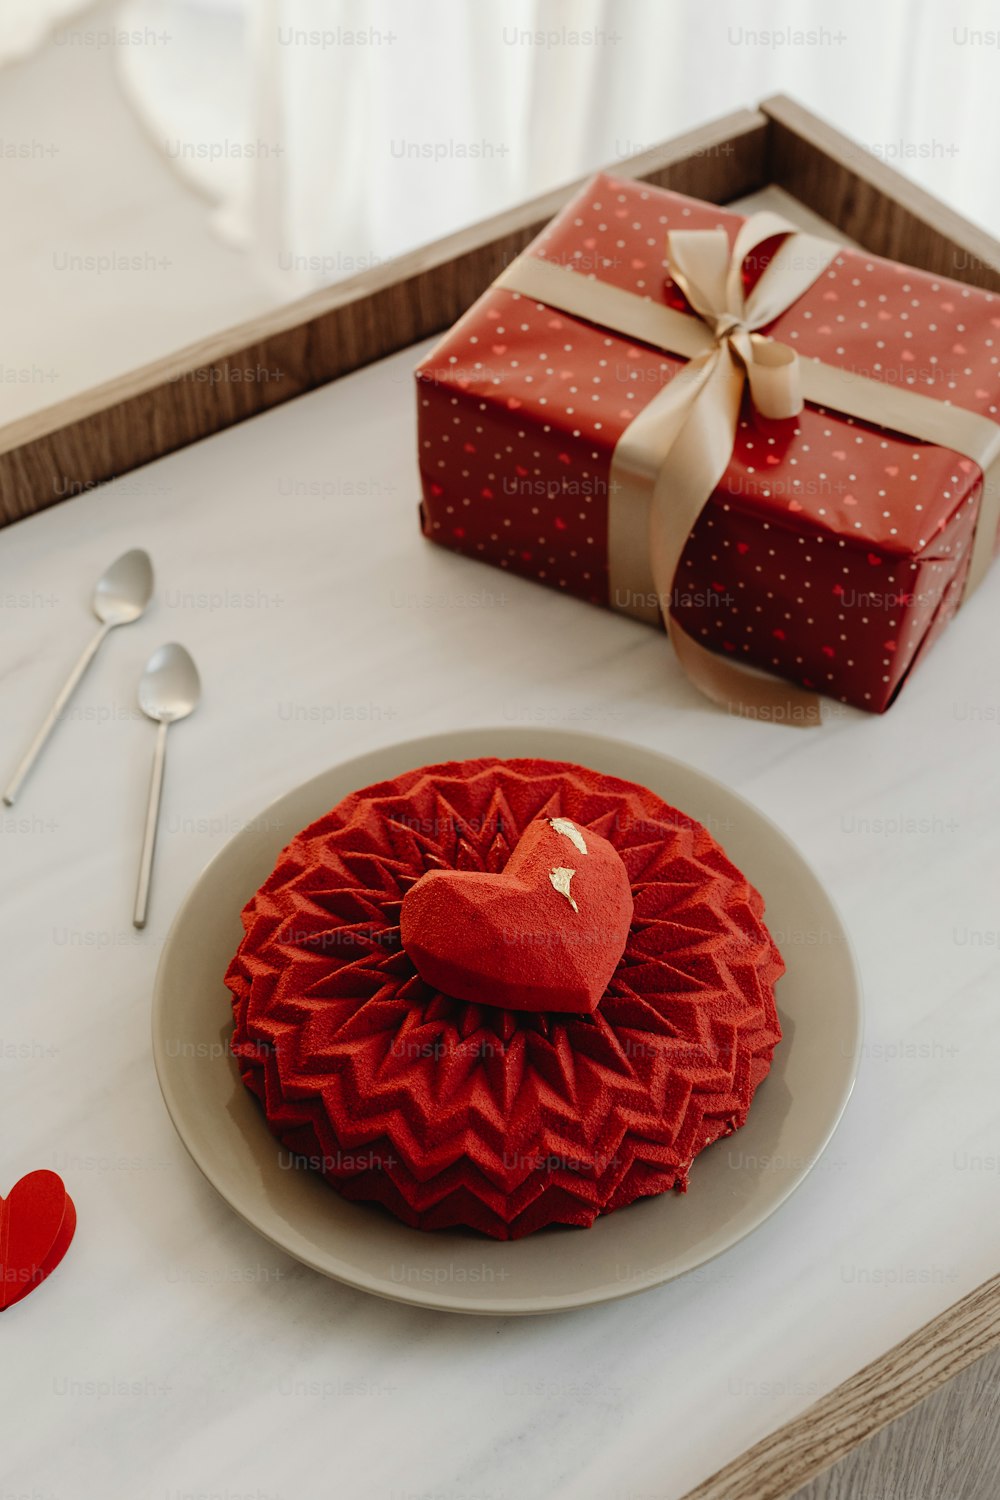 a red heart shaped cake sitting on top of a white plate